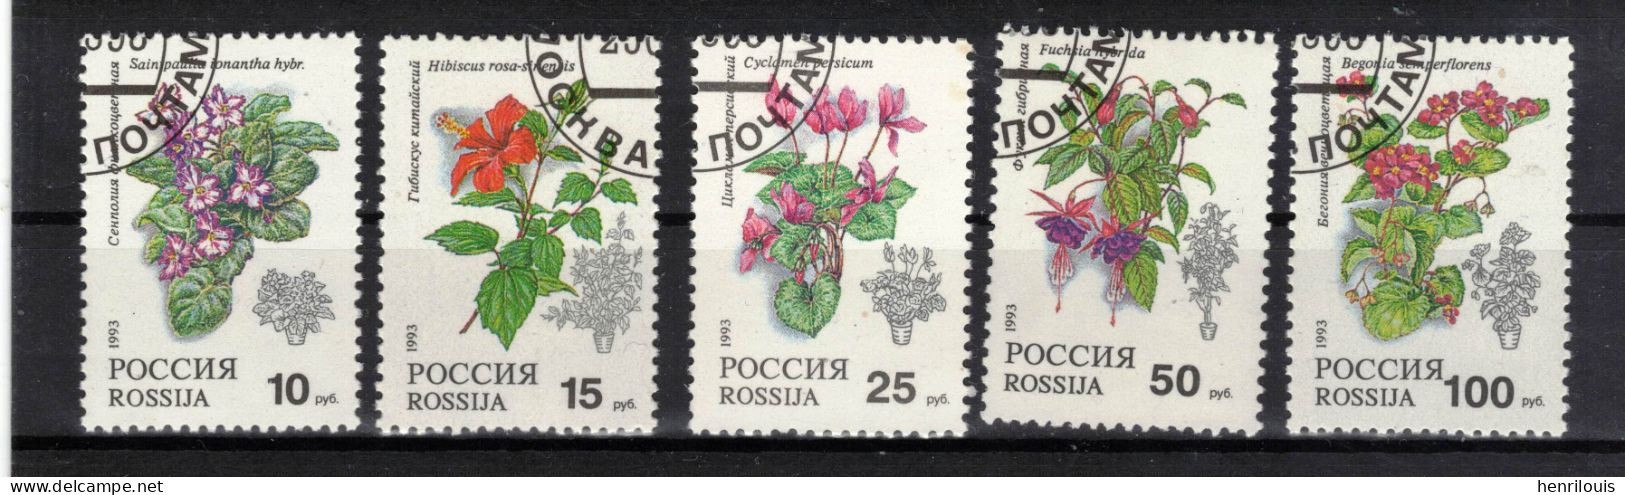 Russie   Timbres  De 1993  ( Ref 1332 H)  Flore - Fleurs - Used Stamps